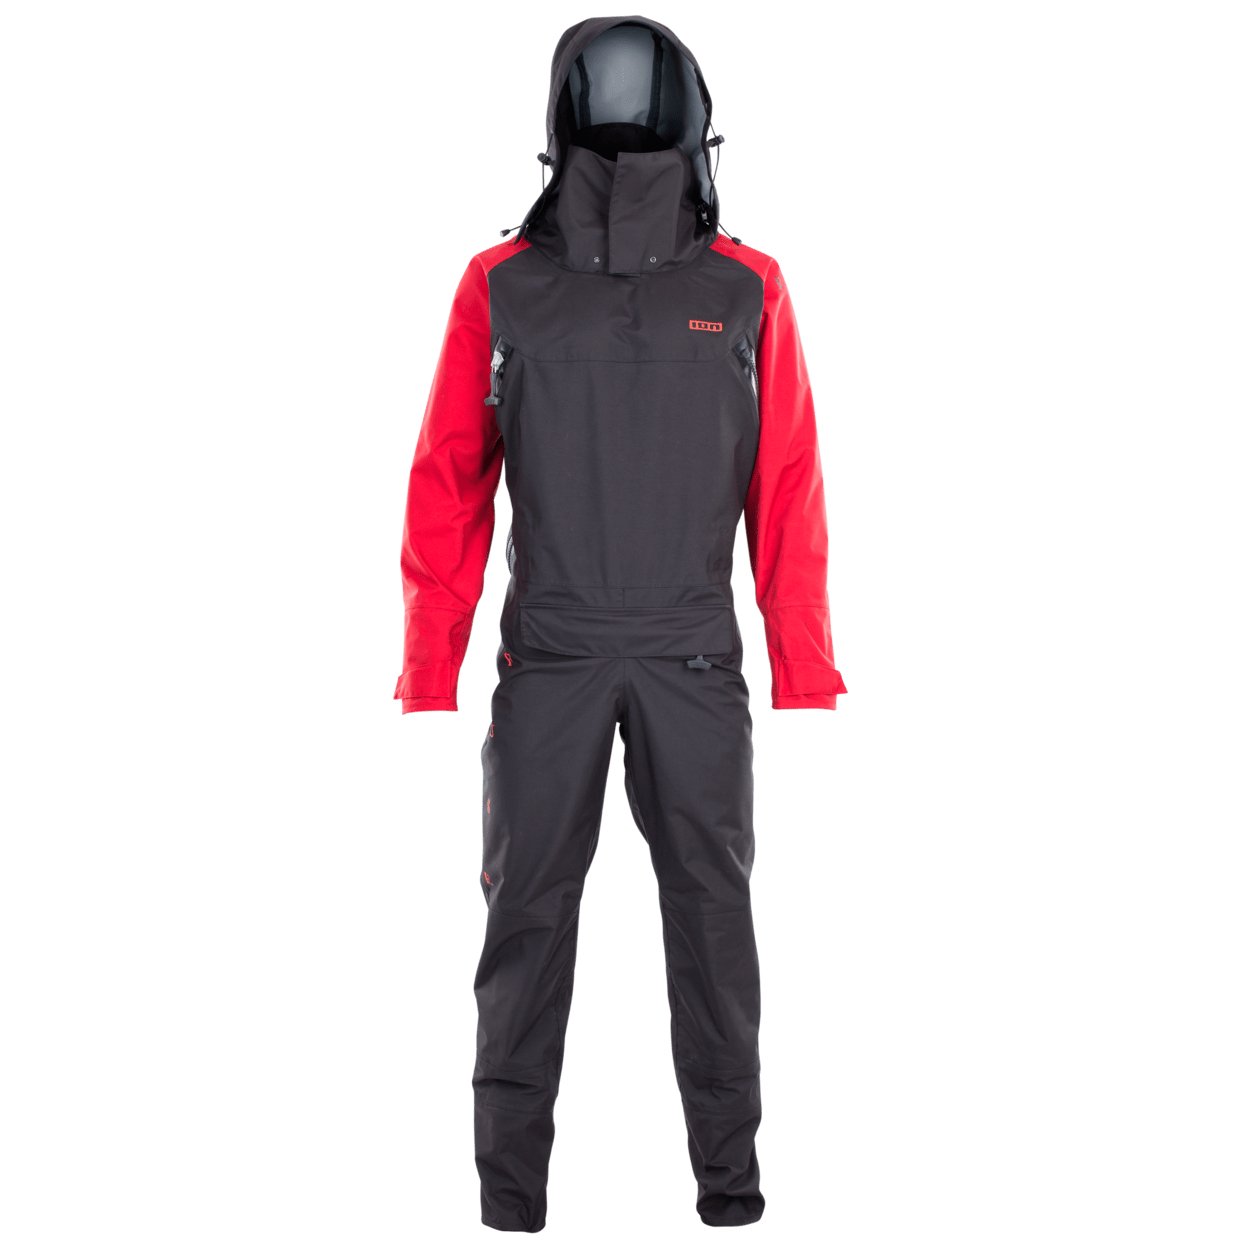 ION Fuse Lightweight Drysuit Back Zip 2022 - Worthing Watersports - 9010583008875 - Wetsuits - ION Water